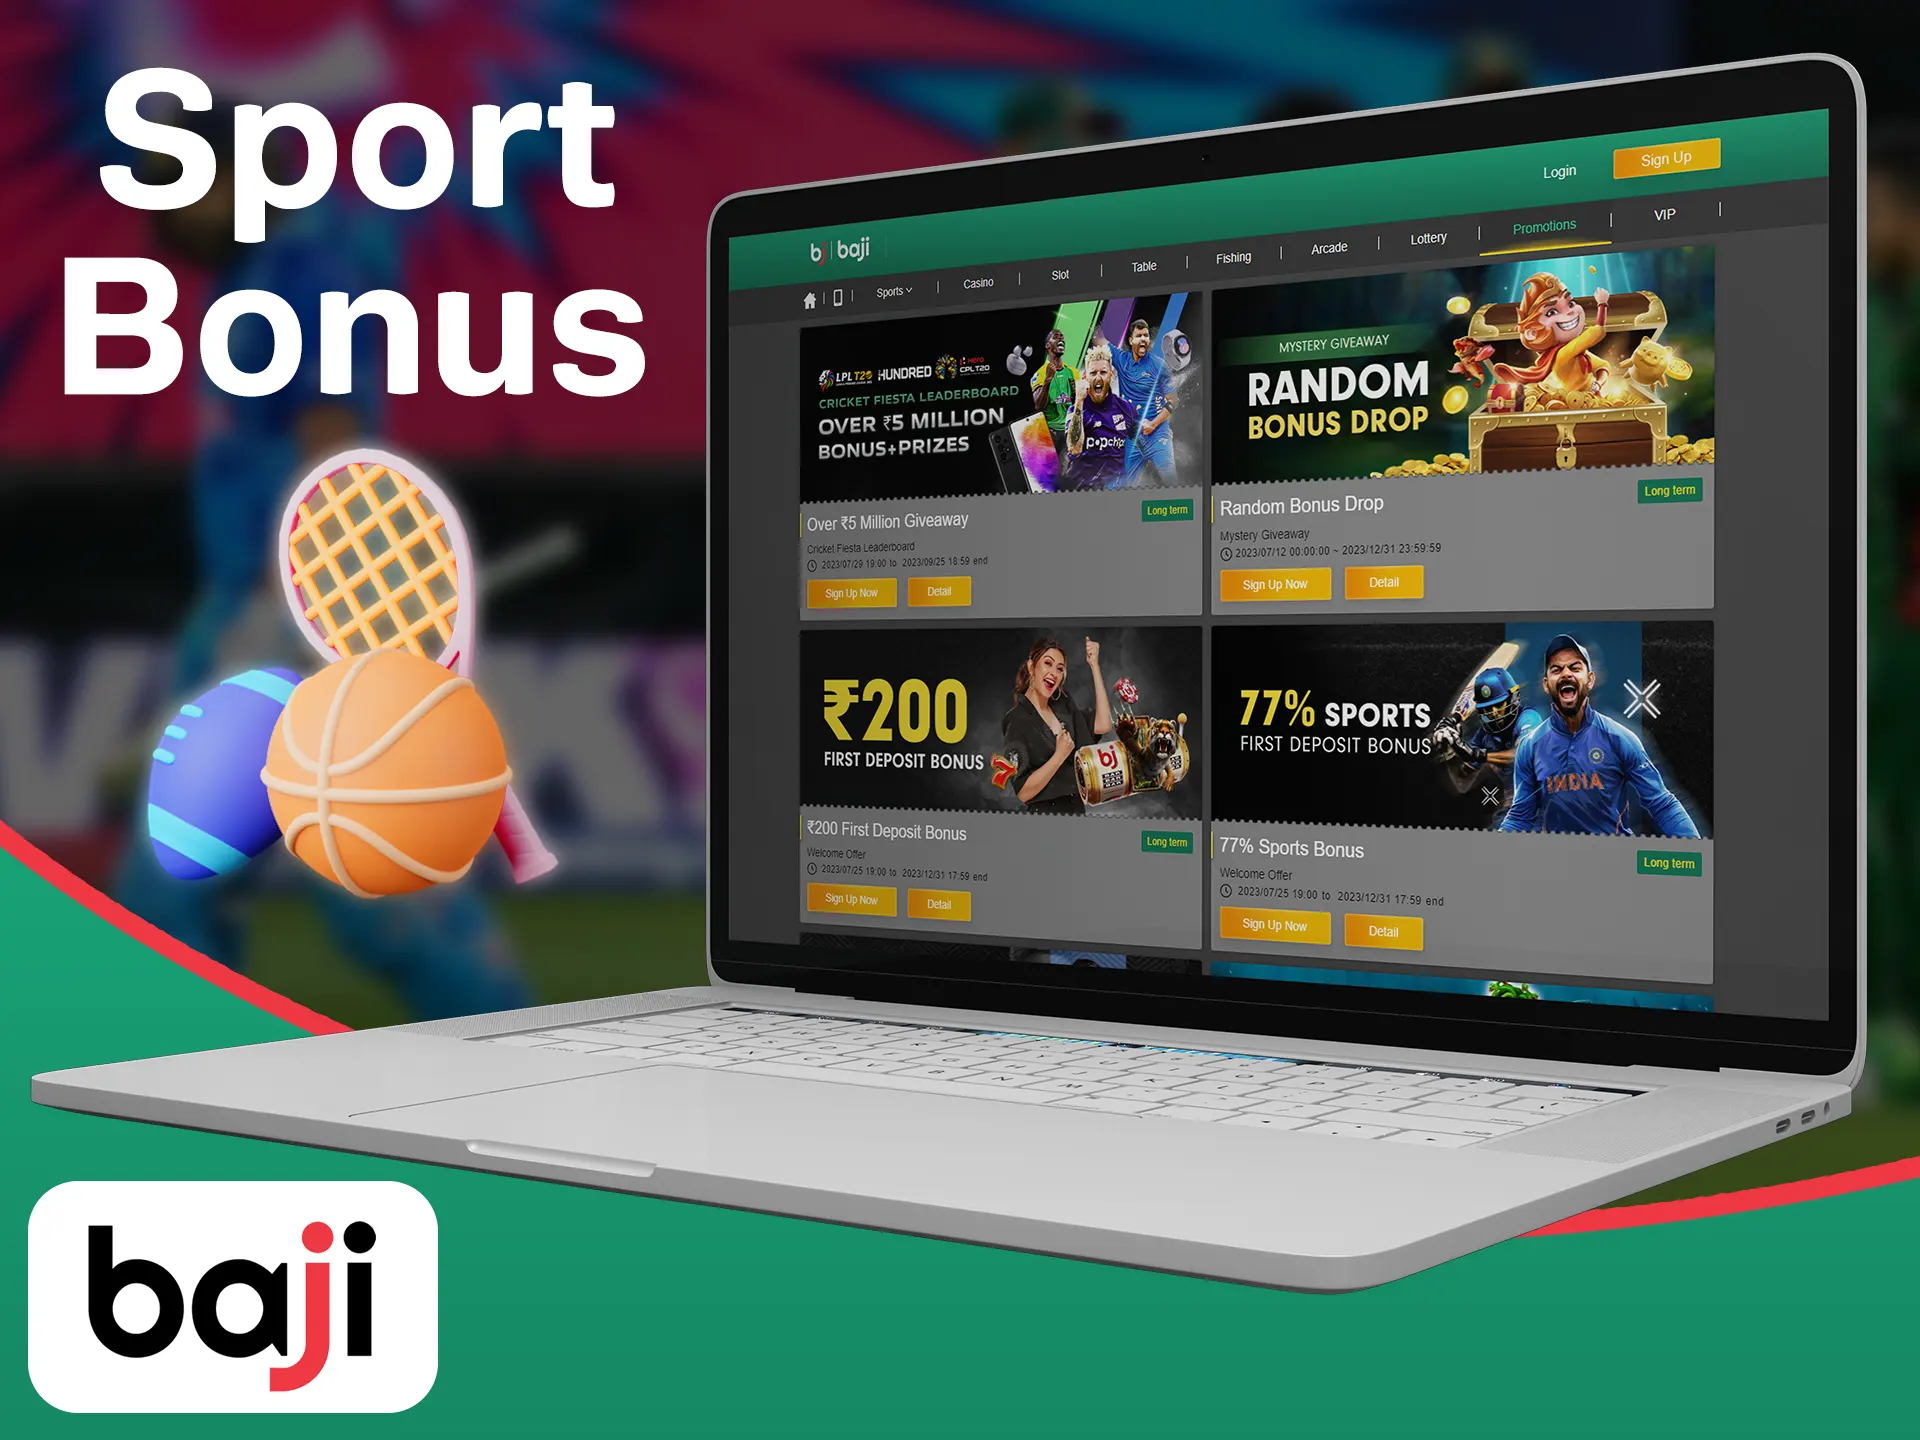 Get your exclusive bonus by making bets at the Baji.